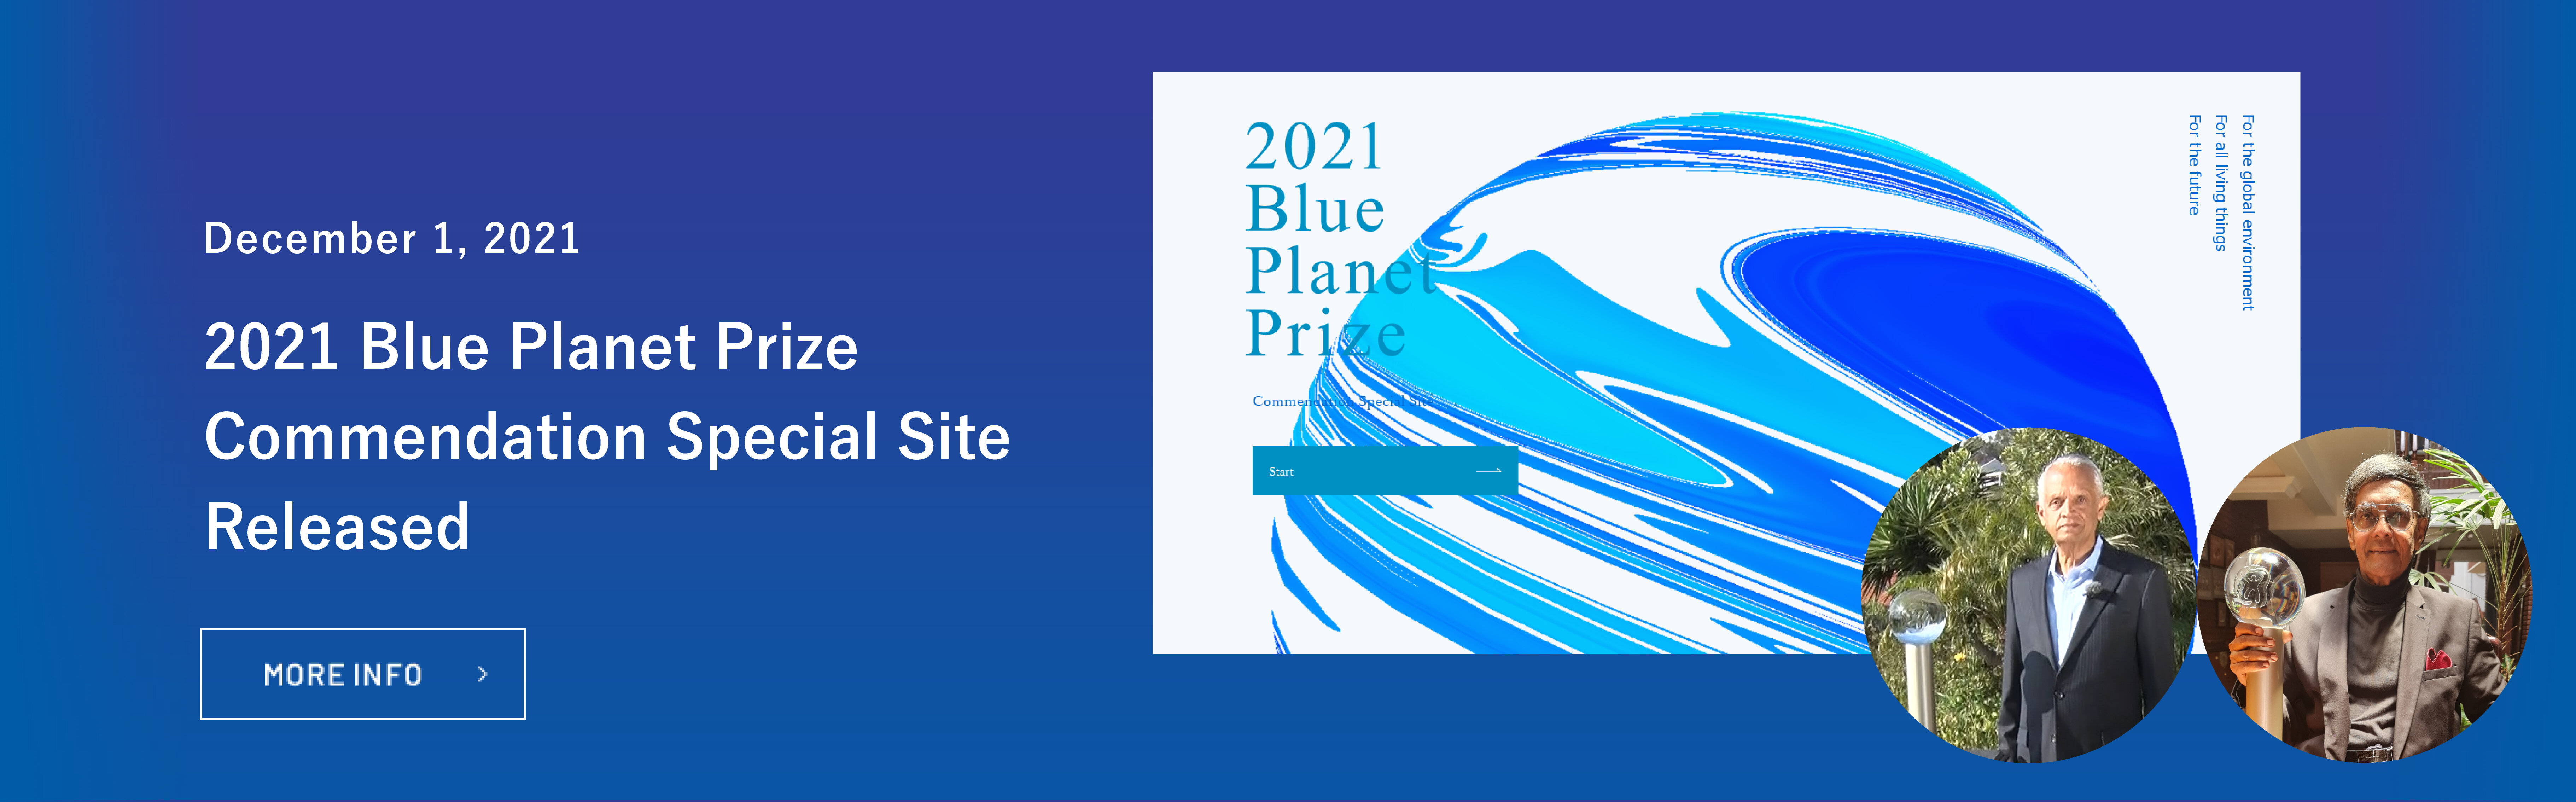 2021 Blue Planet Prize Commendation Special Site Released